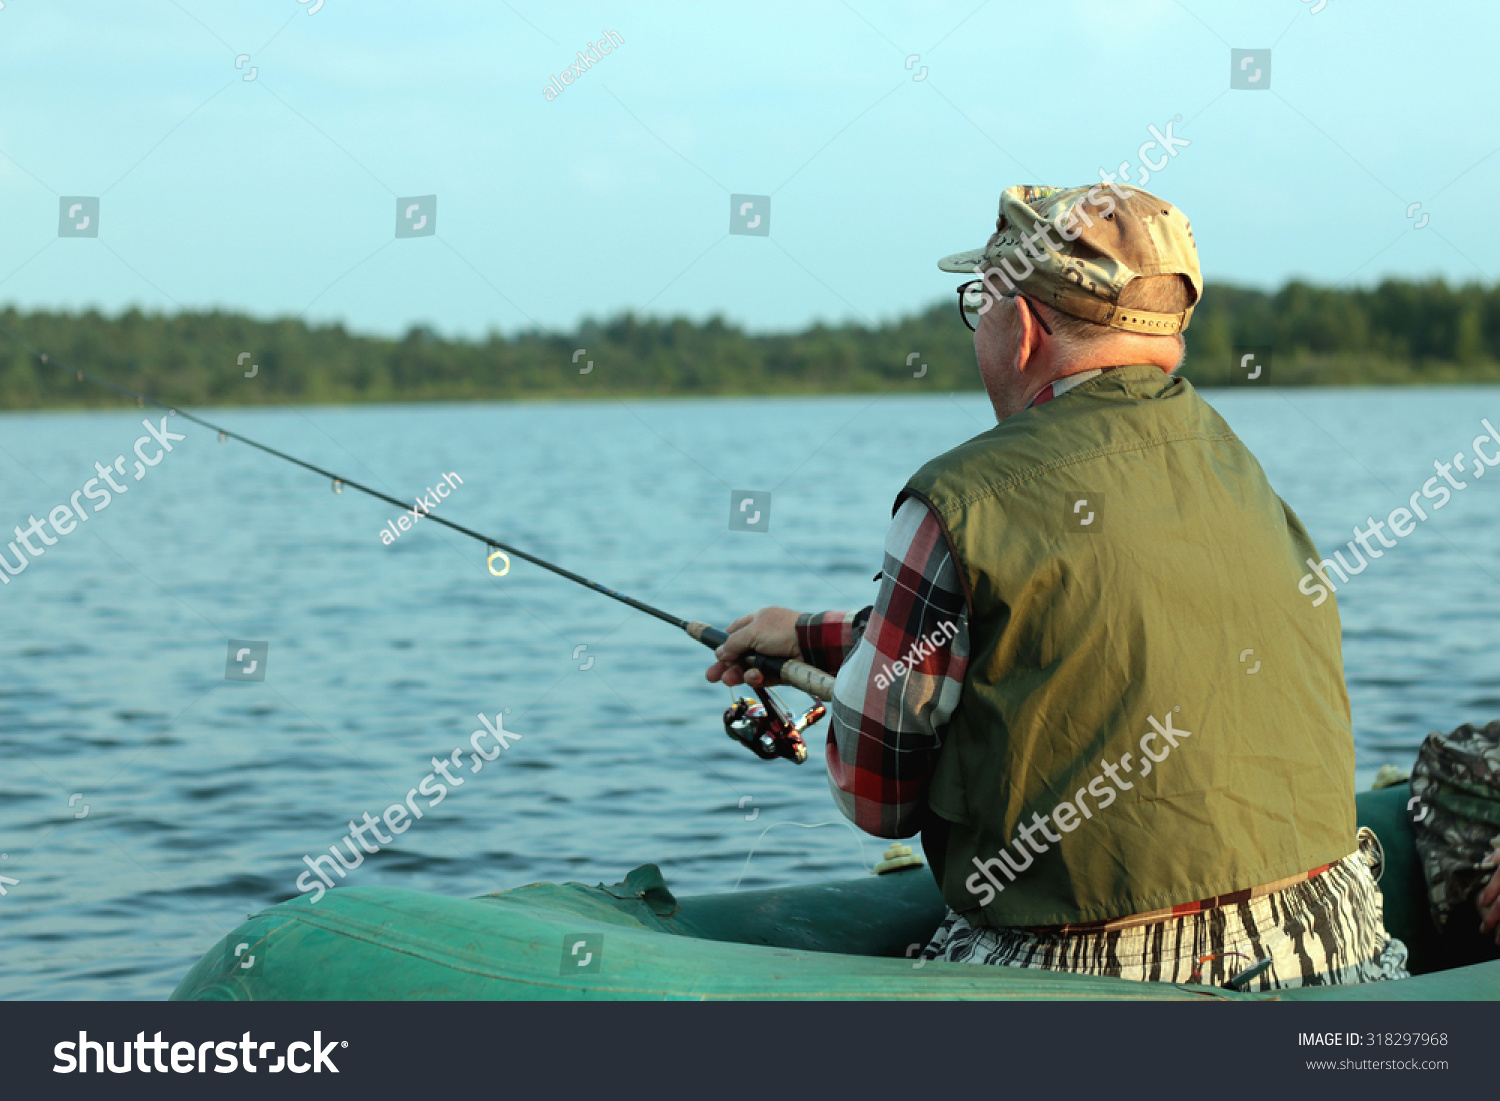 Spinning fisherman on a boat fishing #318297968